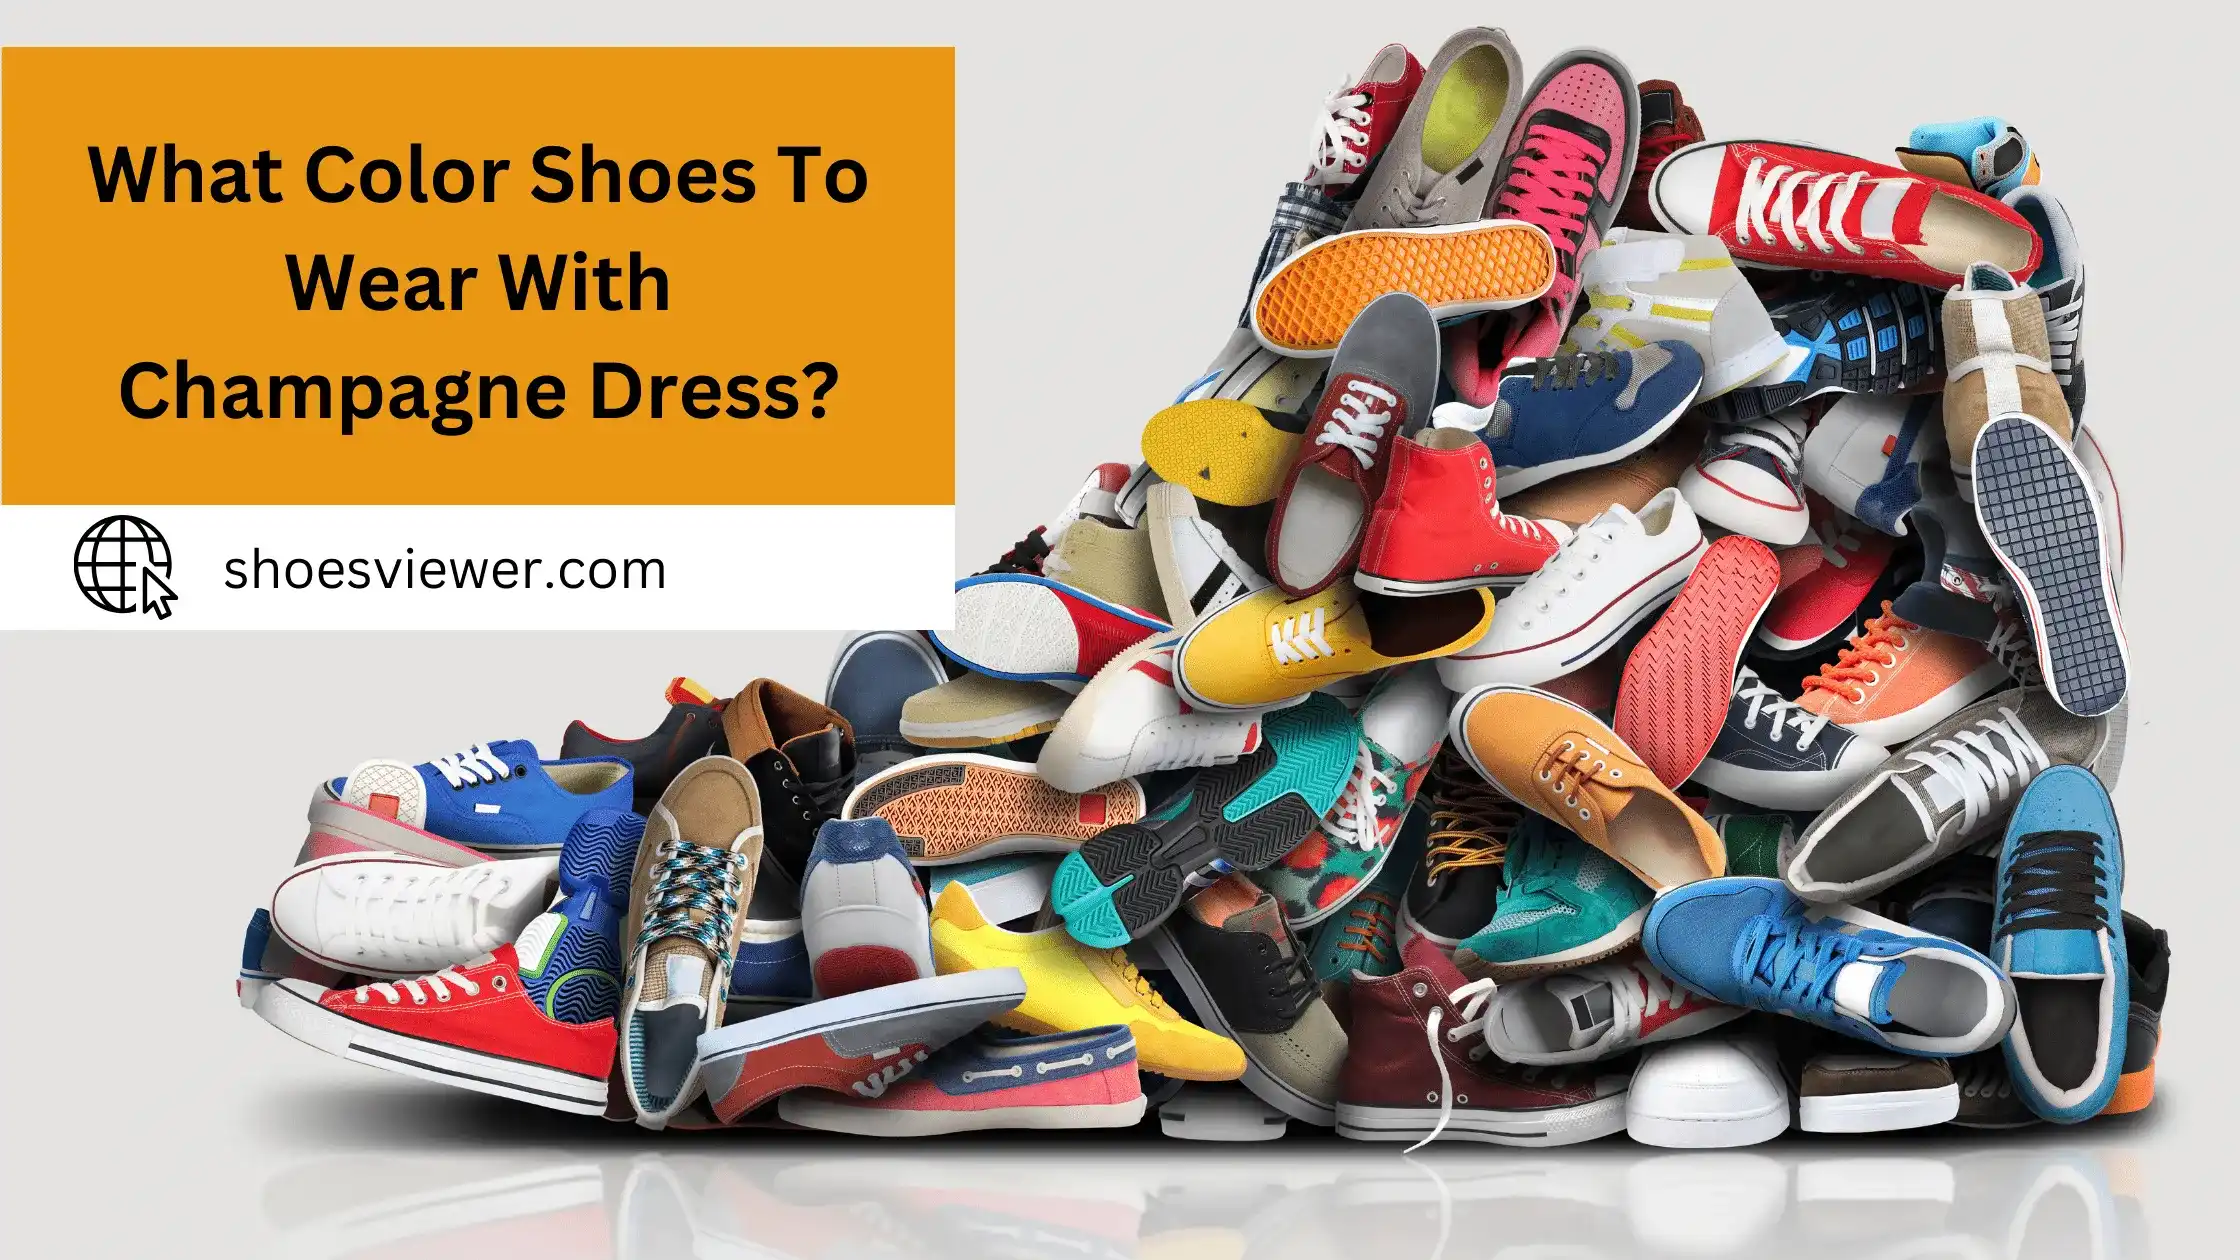 What Color Shoes To Wear With Champagne Dress? User Guide